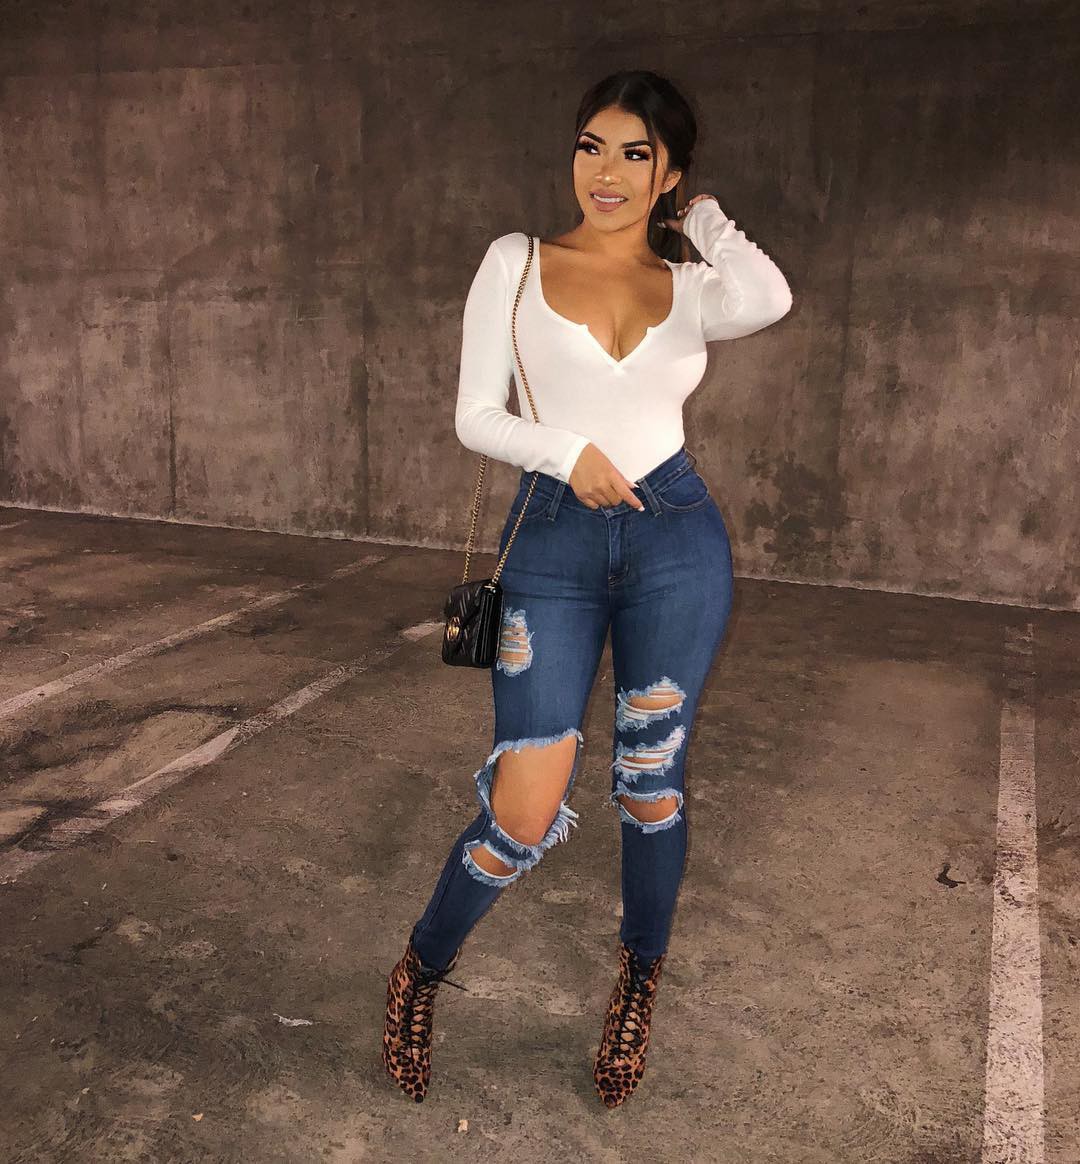 Elsy Guevara denim, jeans outfit ideas, female thighs: Denim,  Cute outfits,  Jeans Outfit,  Boyfriend Jeans  